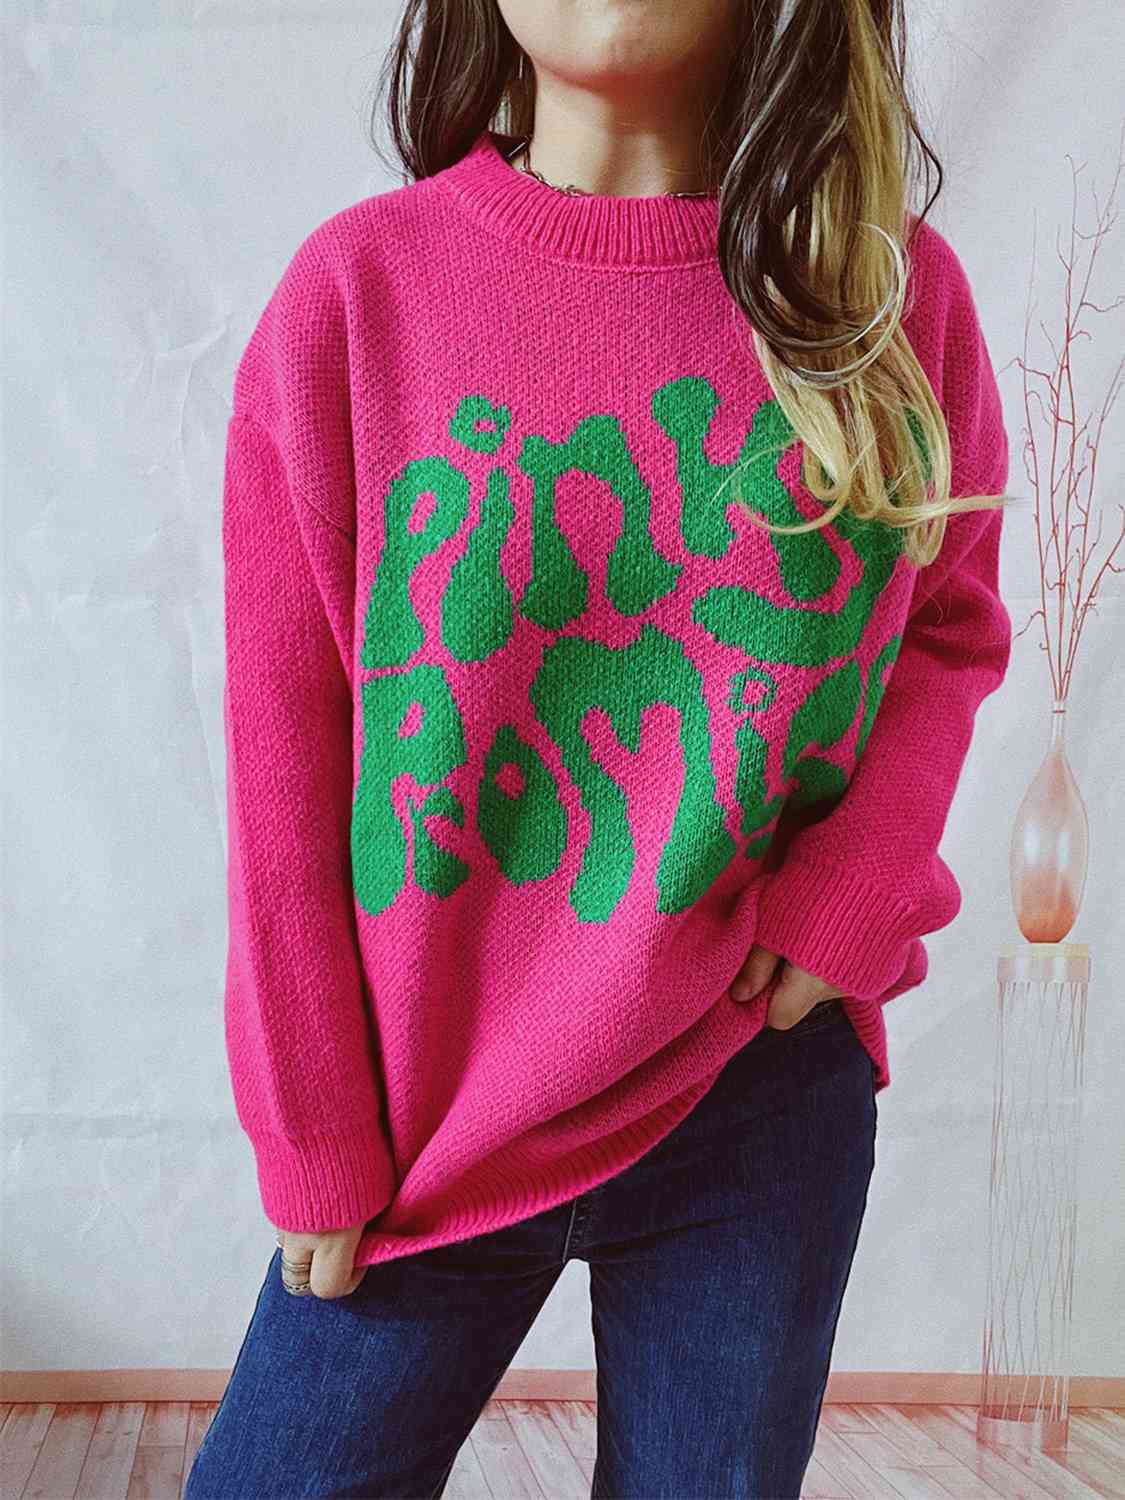 PINKY PROMISE Graphic Sweater